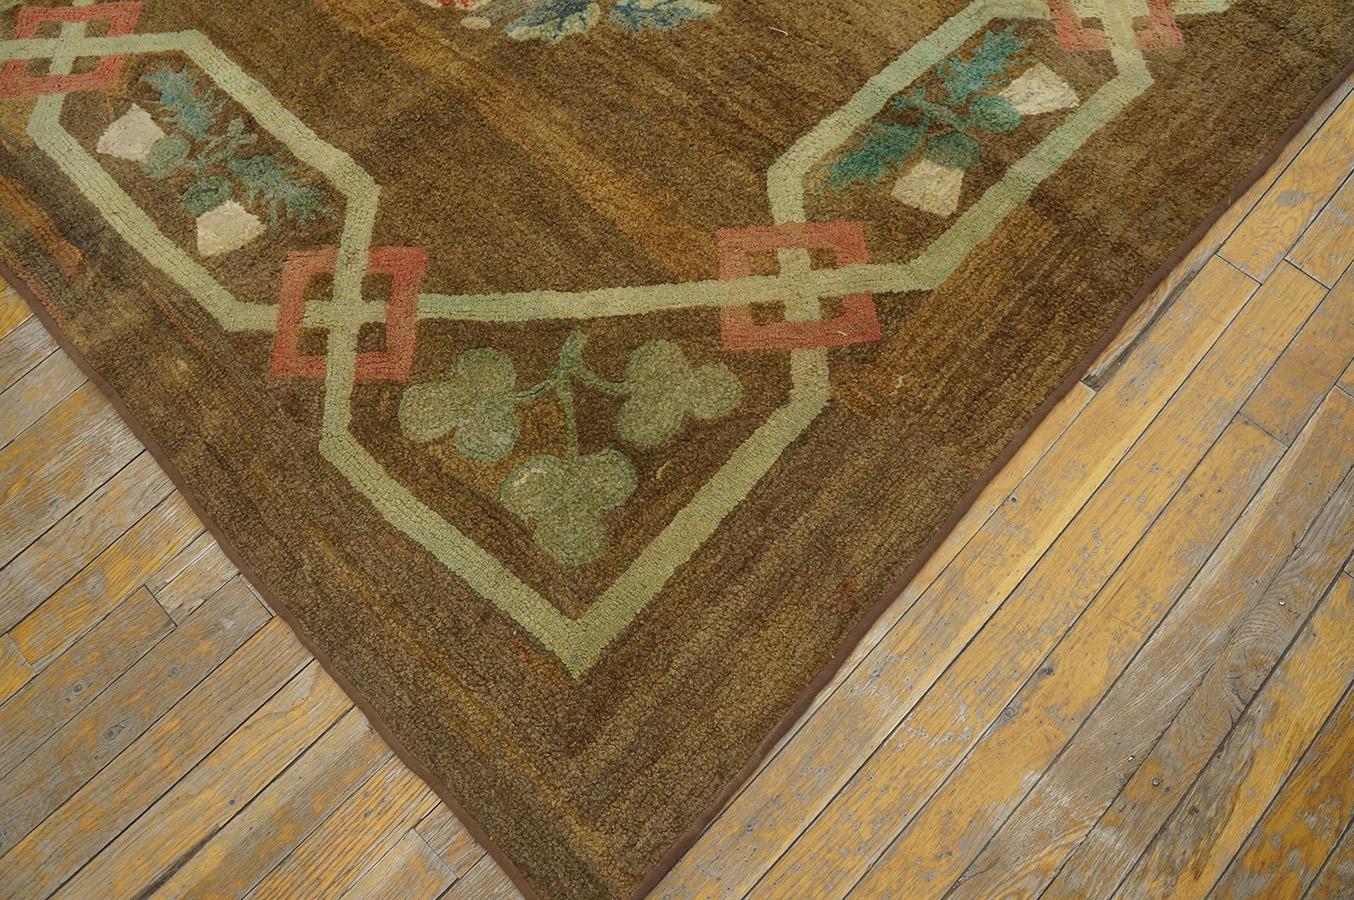 Early 20th Century American Hooked Rug ( 5' 9''x5' 10'' - 175 x 177 cm ) For Sale 2